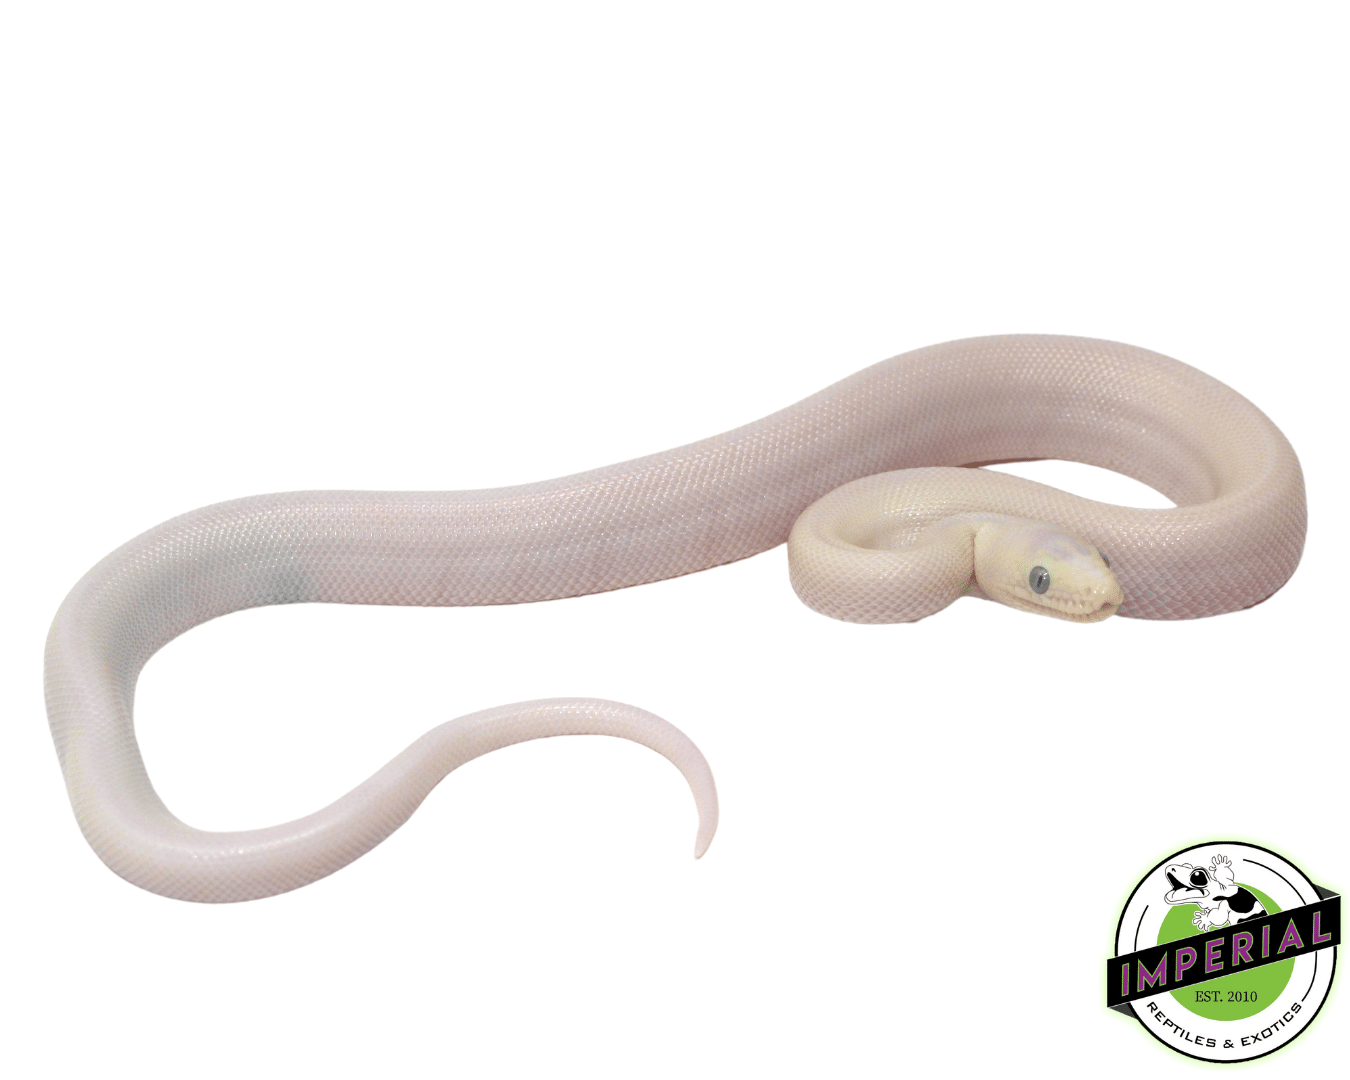 leucistic colombian rainbow boa constrictor for sale, buy reptiles online